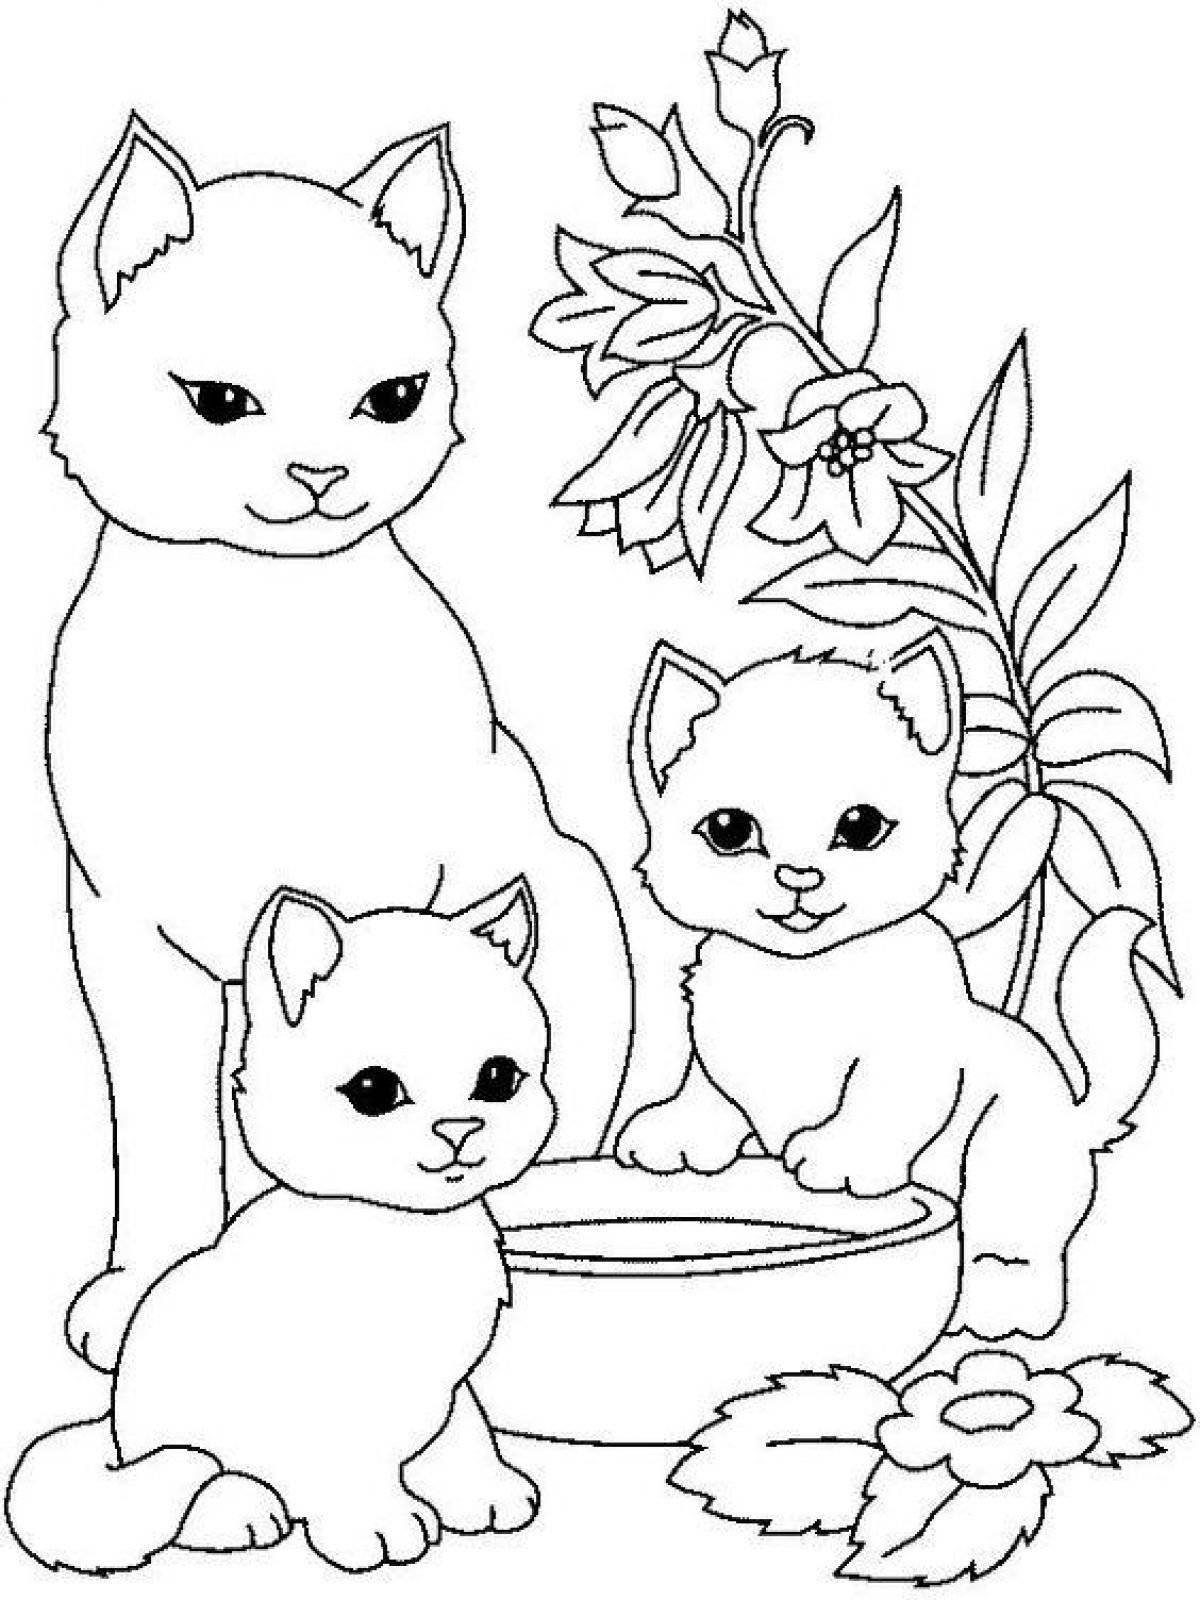 Fun coloring book for cats